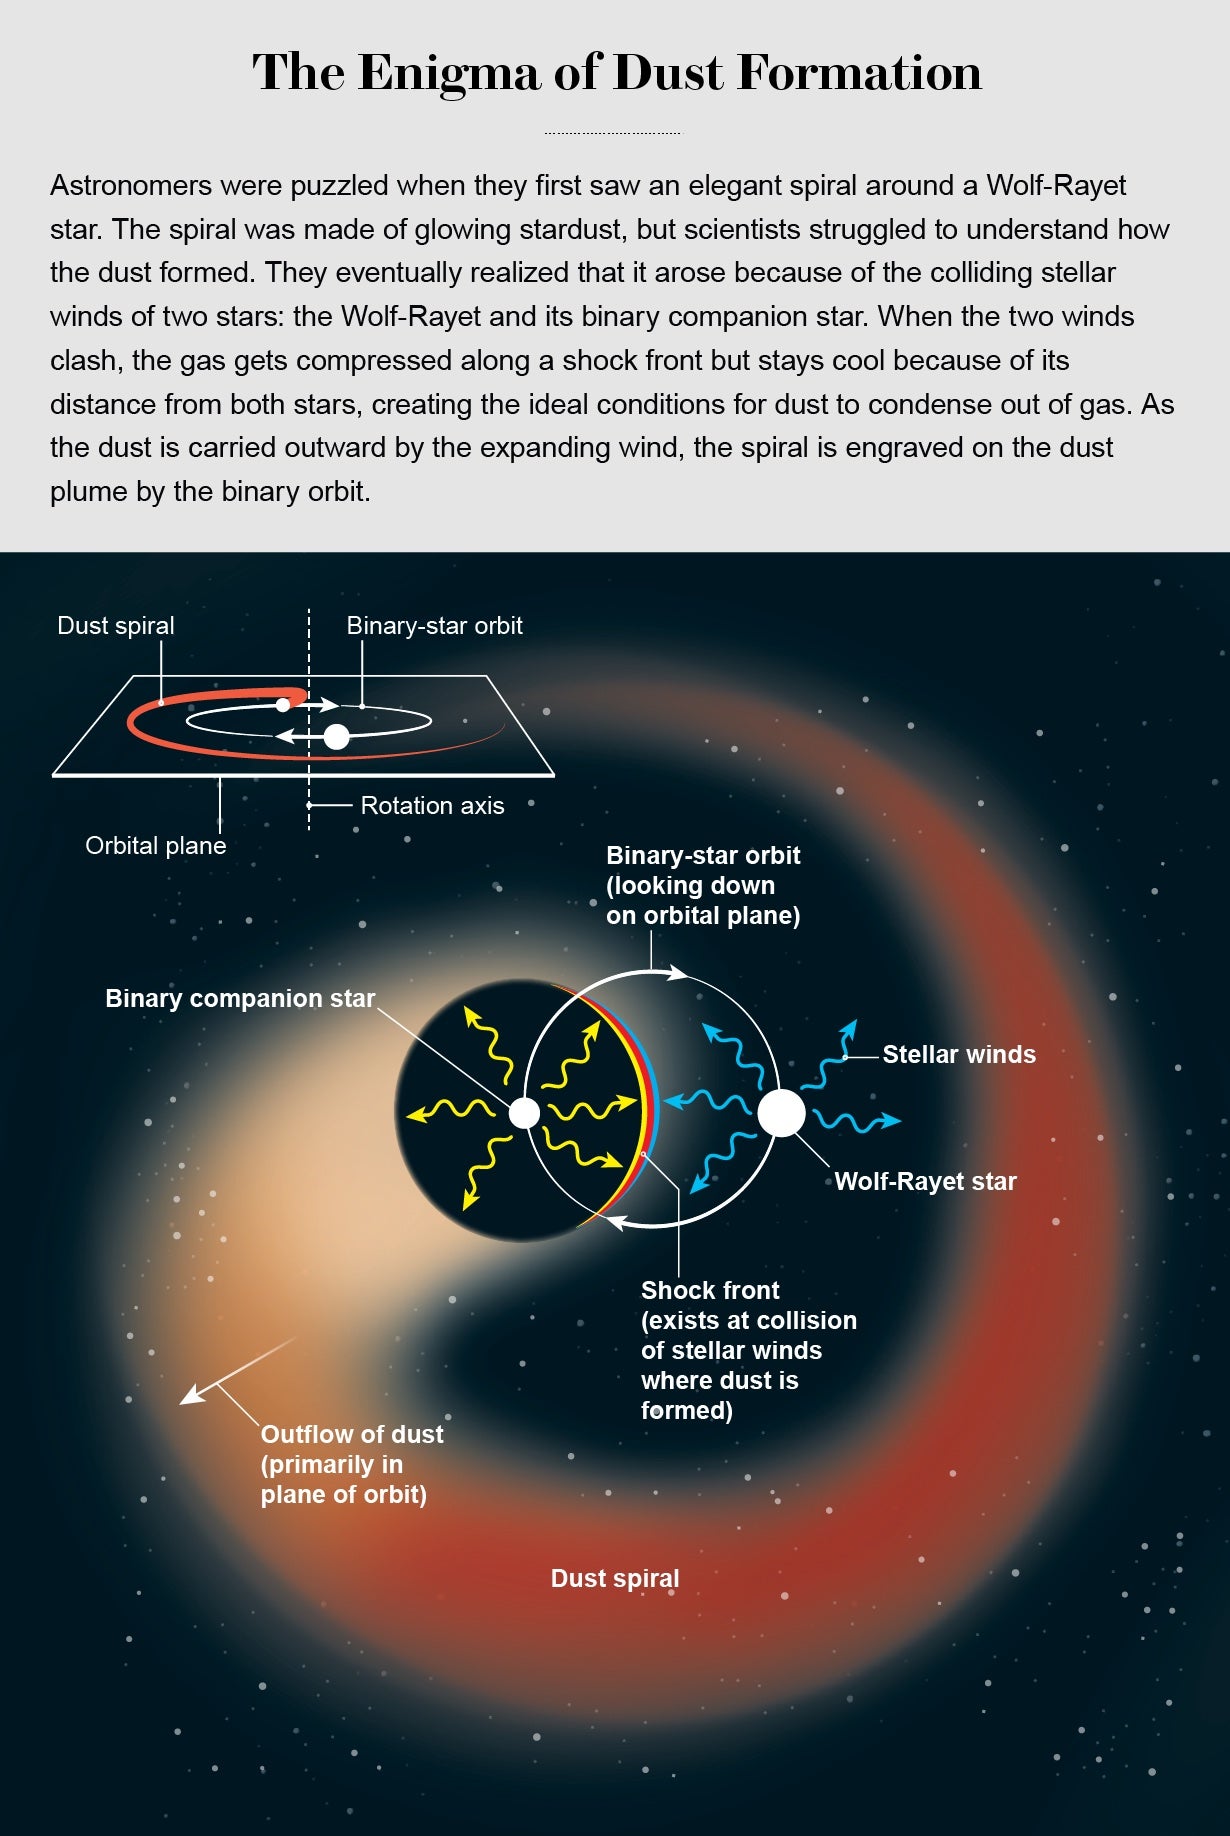 Diagram shows how the stellar winds of a Wolf-Rayet star and its binary-star companion interact to form a dust spiral.